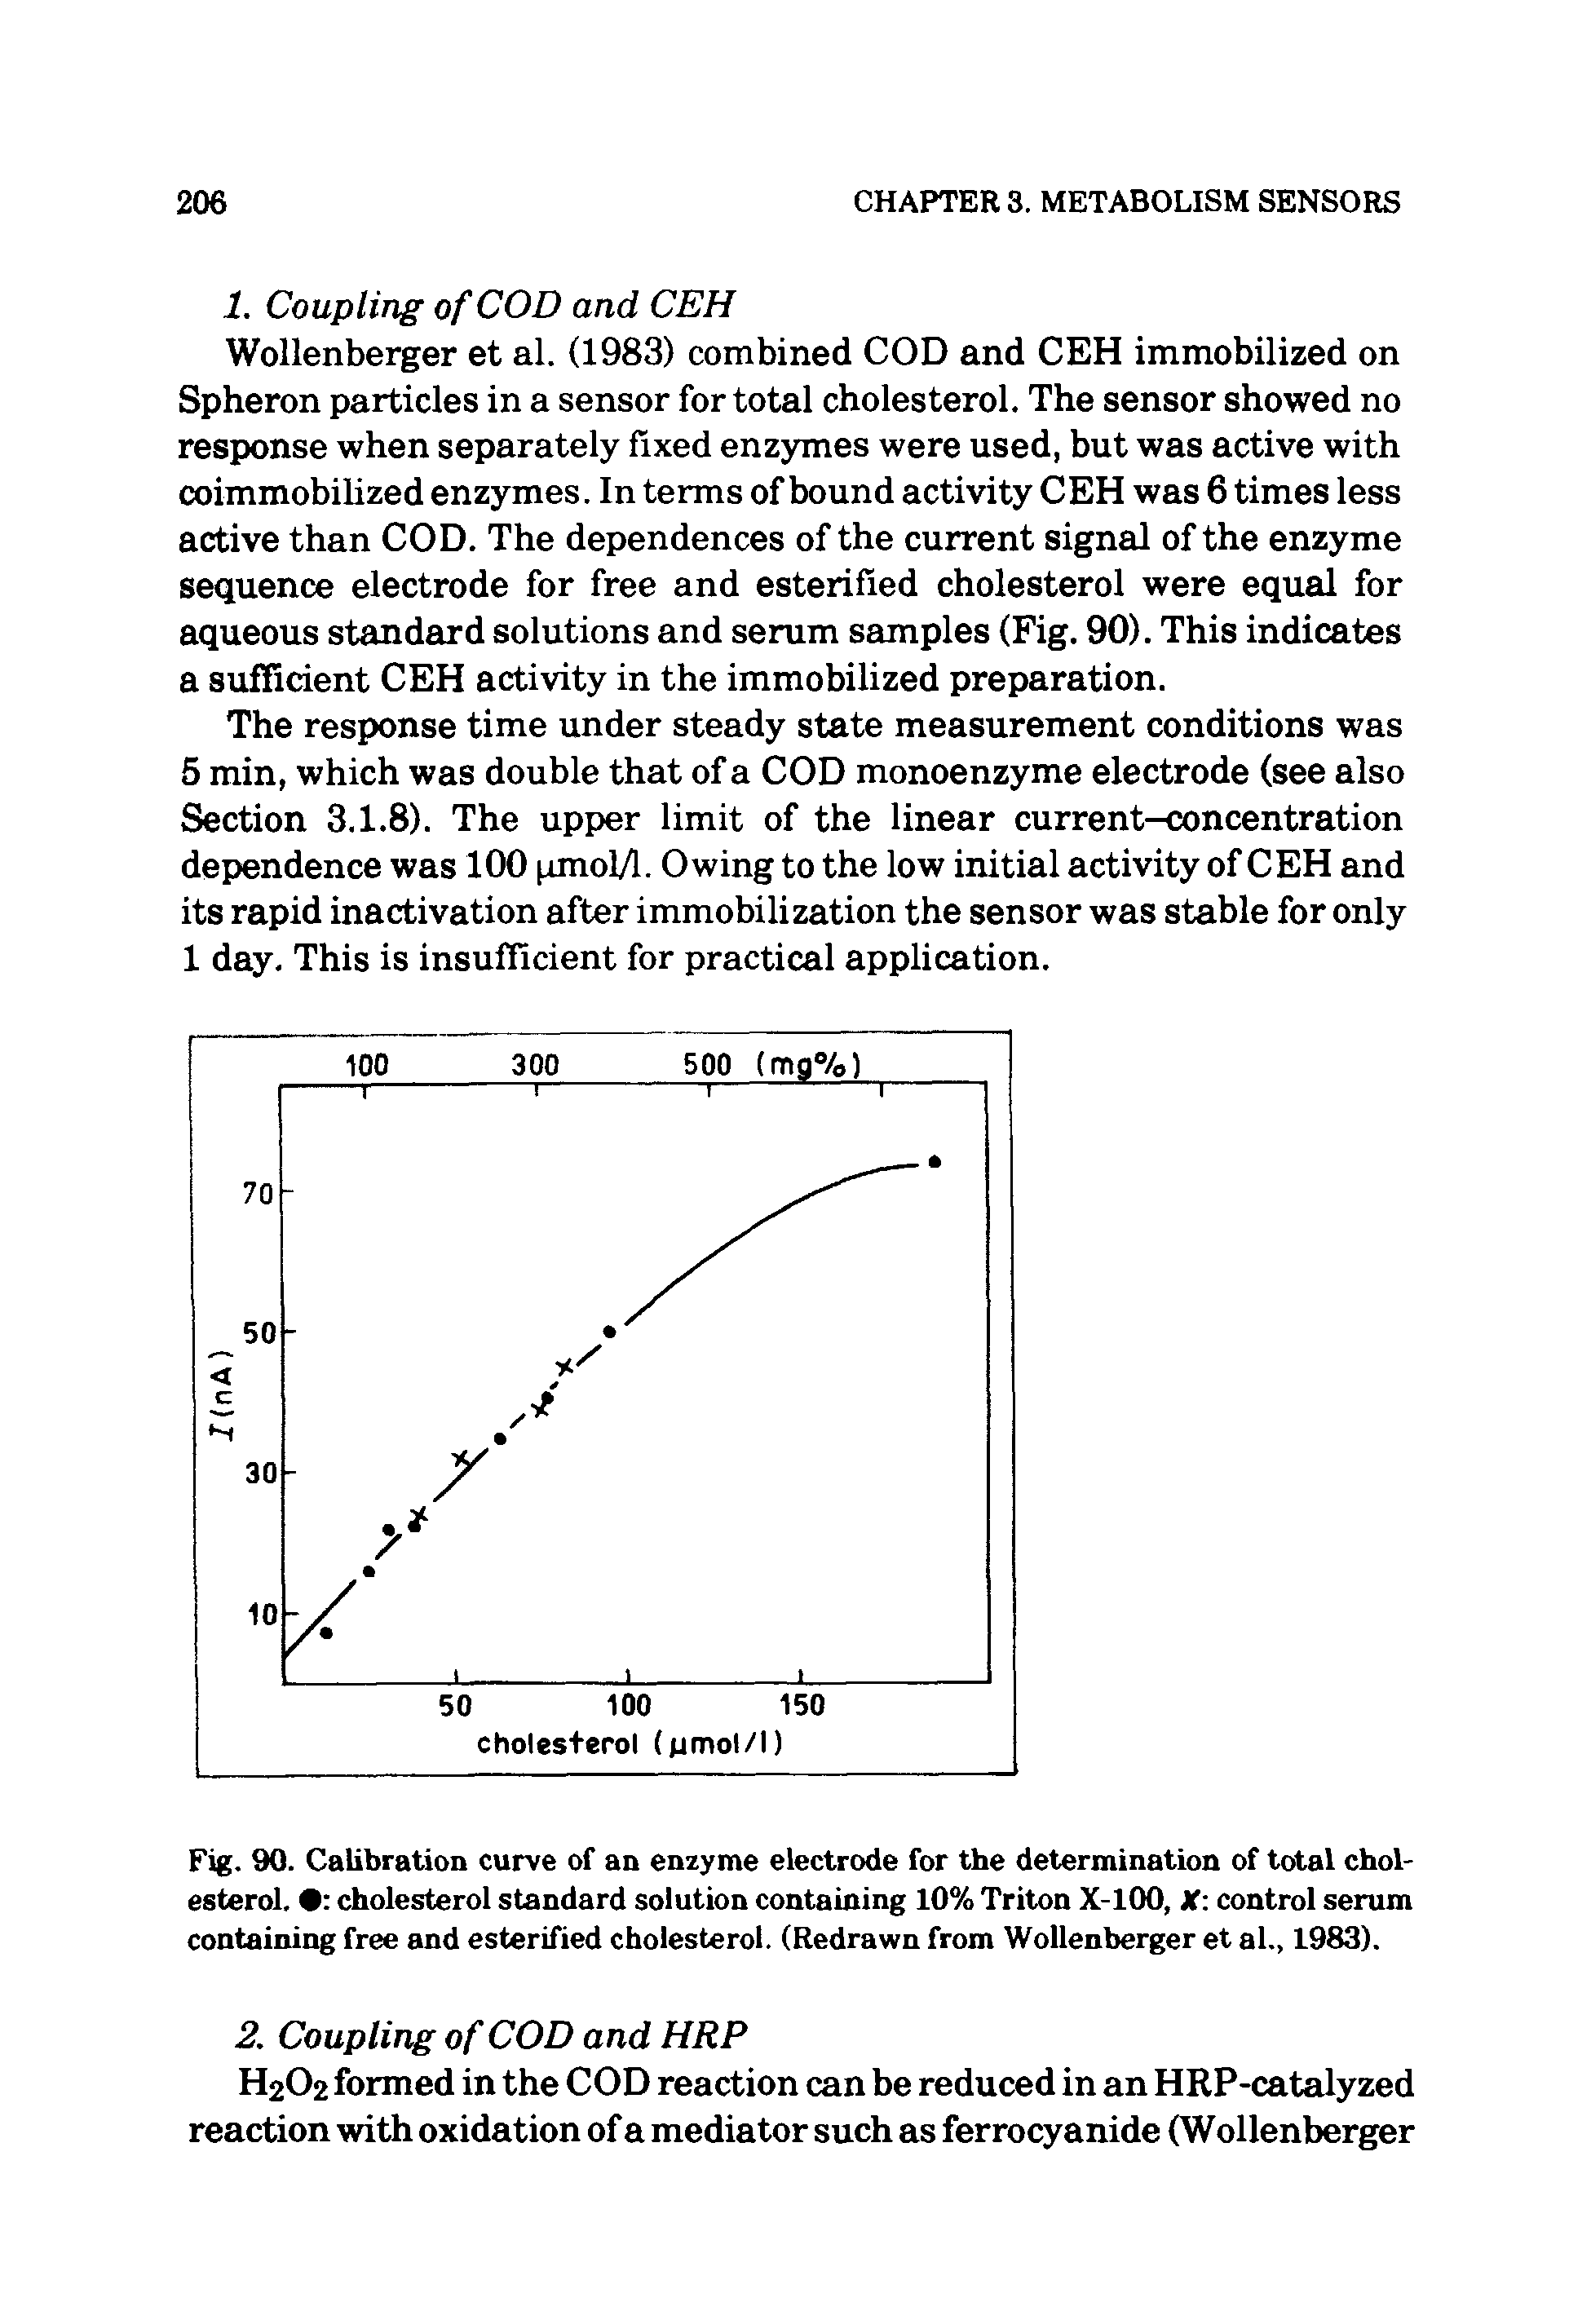 Fig. 90. Calibration curve of an enzyme electrode for the determination of total cholesterol. cholesterol standard solution containing 10% Triton X-100, X control serum containing free and esterified cholesterol. (Redrawn from Wollenberger et al., 1983).